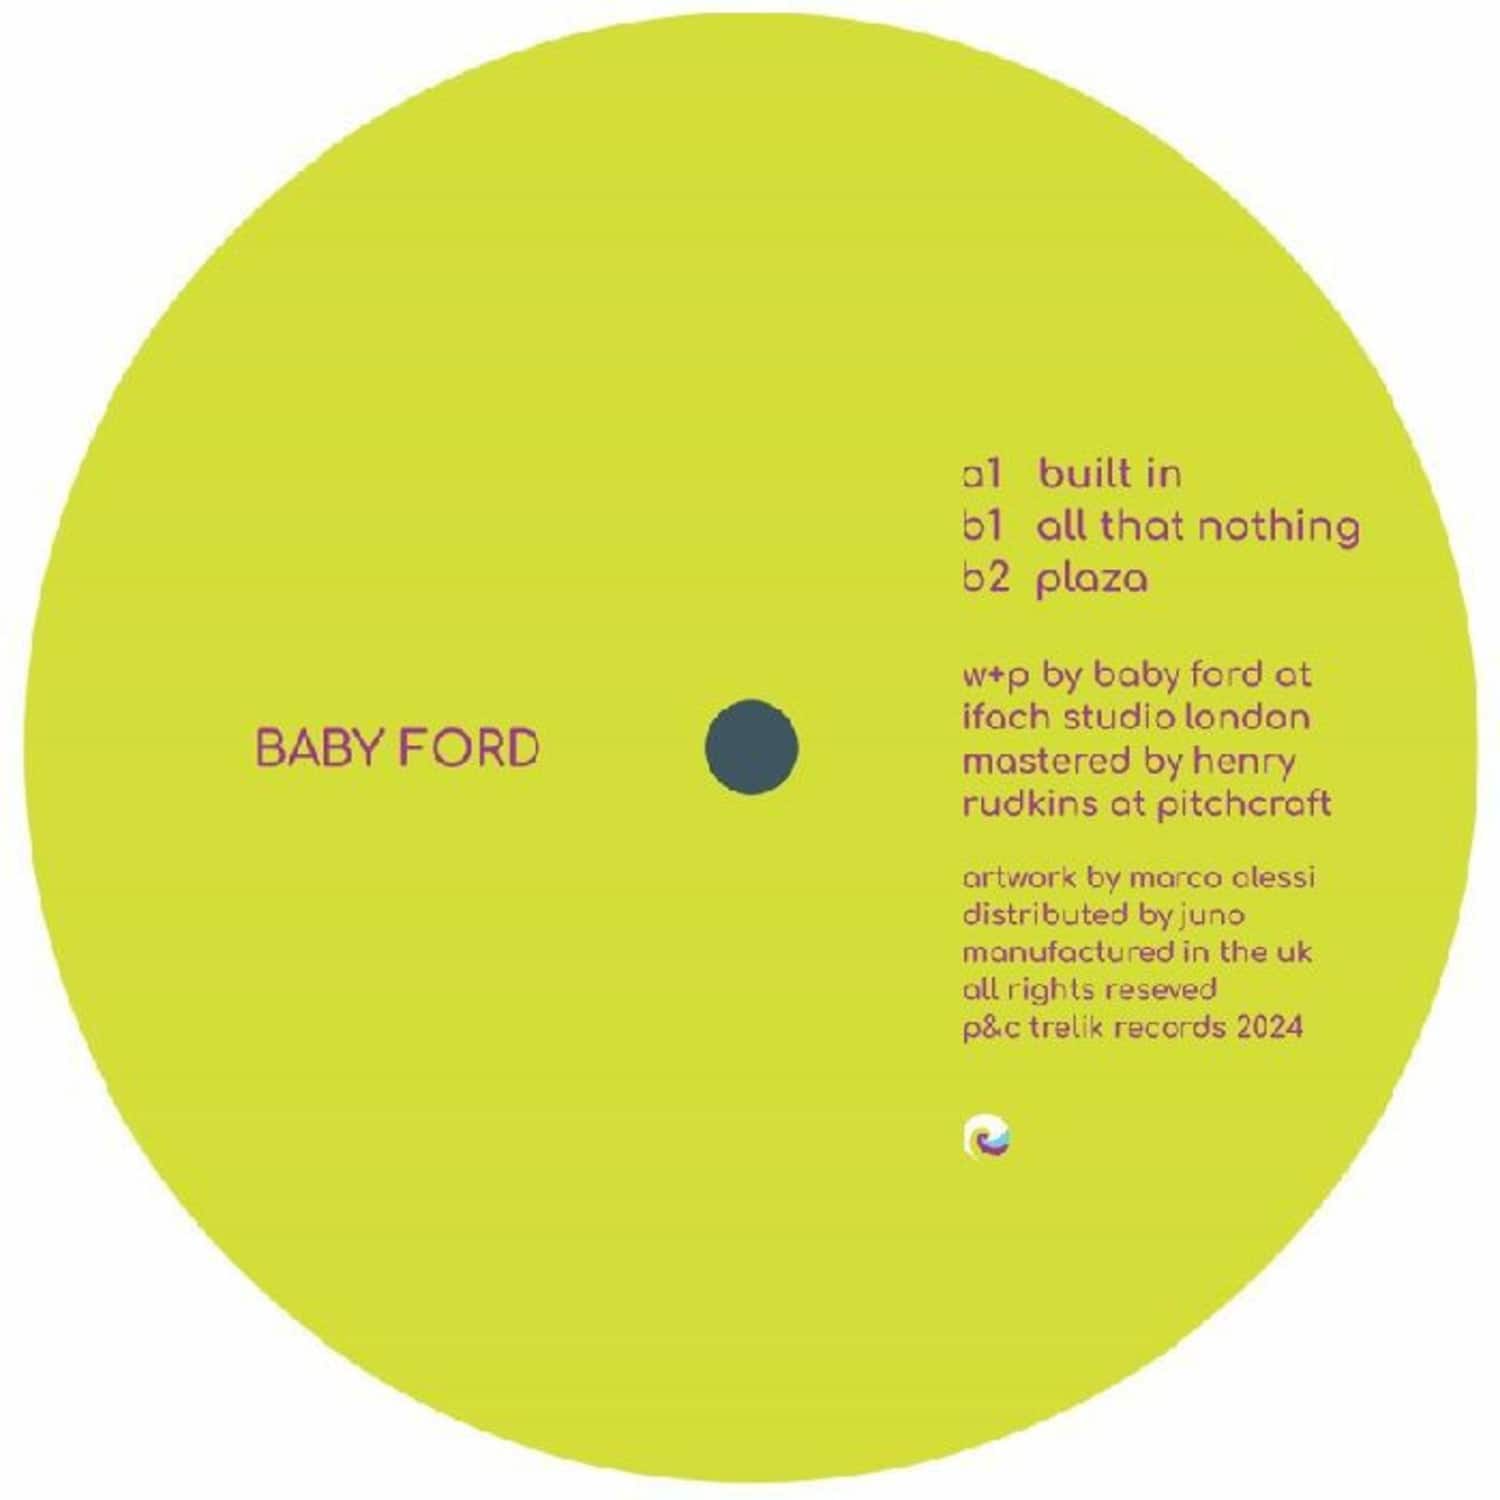 Baby Ford - BUILT IN 